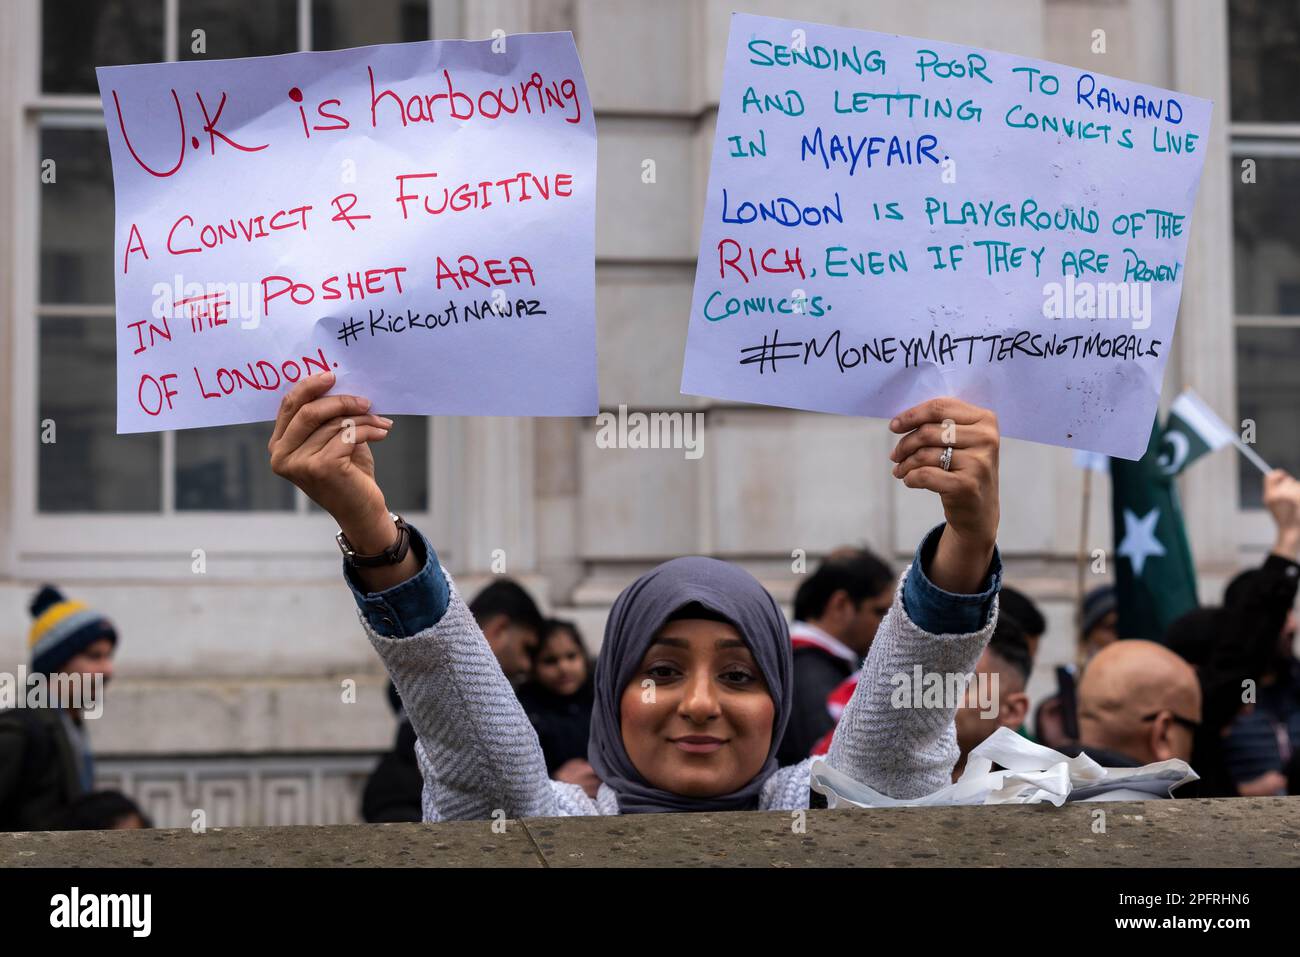 Whitehall, Westminster, London, UK. 18th Mar, 2023. A protest is taking place outside Downing Street in support of former Pakistan prime minister Imran Khan, and against Nawaz Sharif who is living in London. Female with placards Stock Photo